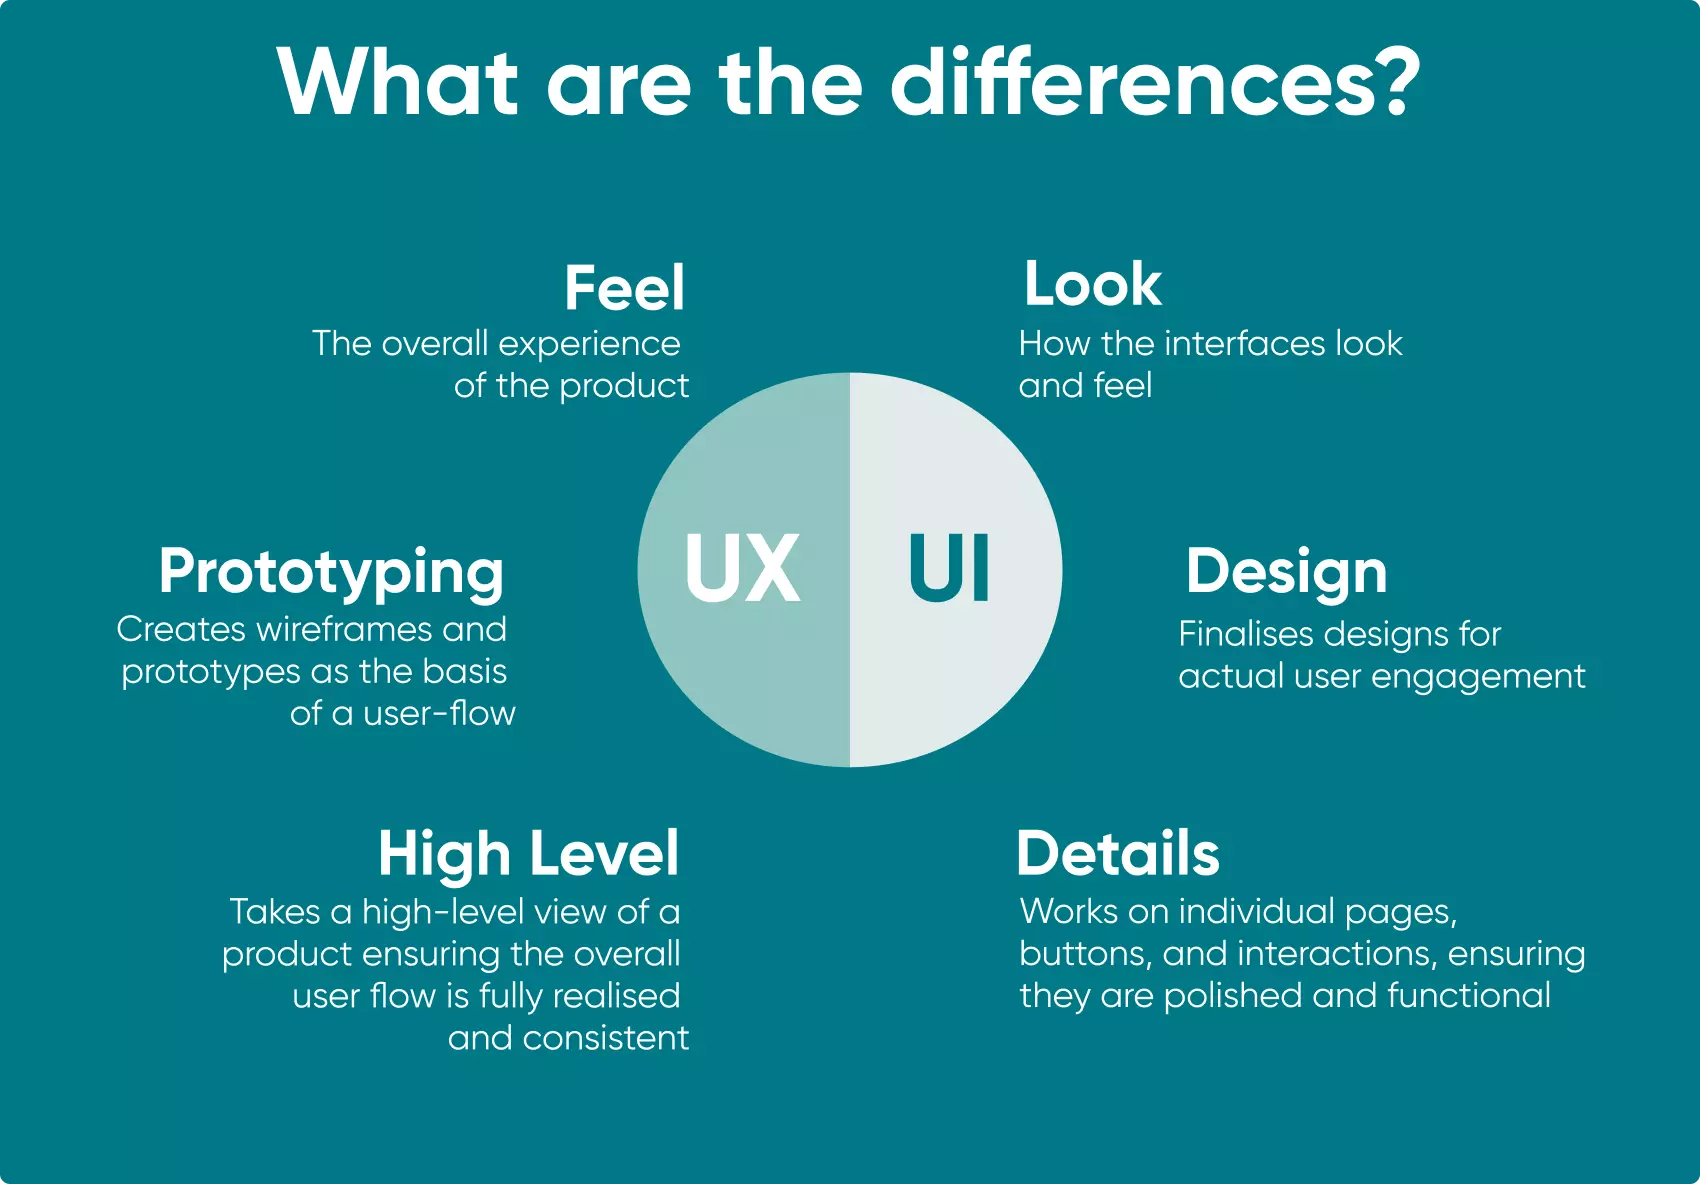 A brief look at the differences between UI and UX design?